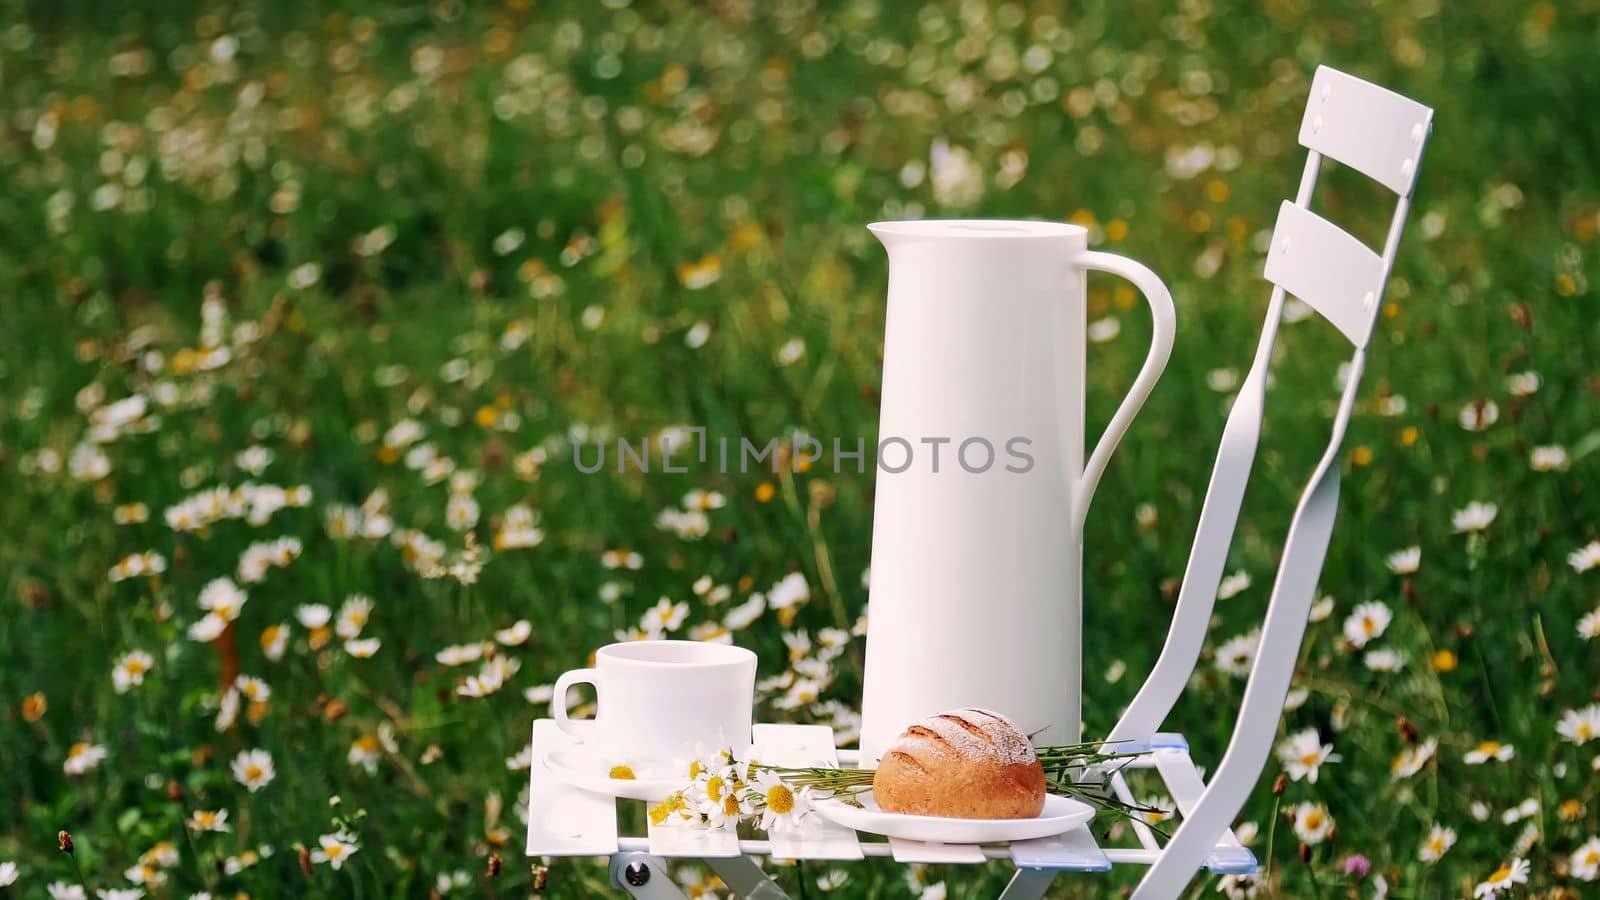 Among the chamomile lawn stands a white chair. On it there is a composition of a white jug, a white cup with tea, a bread and a bouquet of chamomiles. by djtreneryay